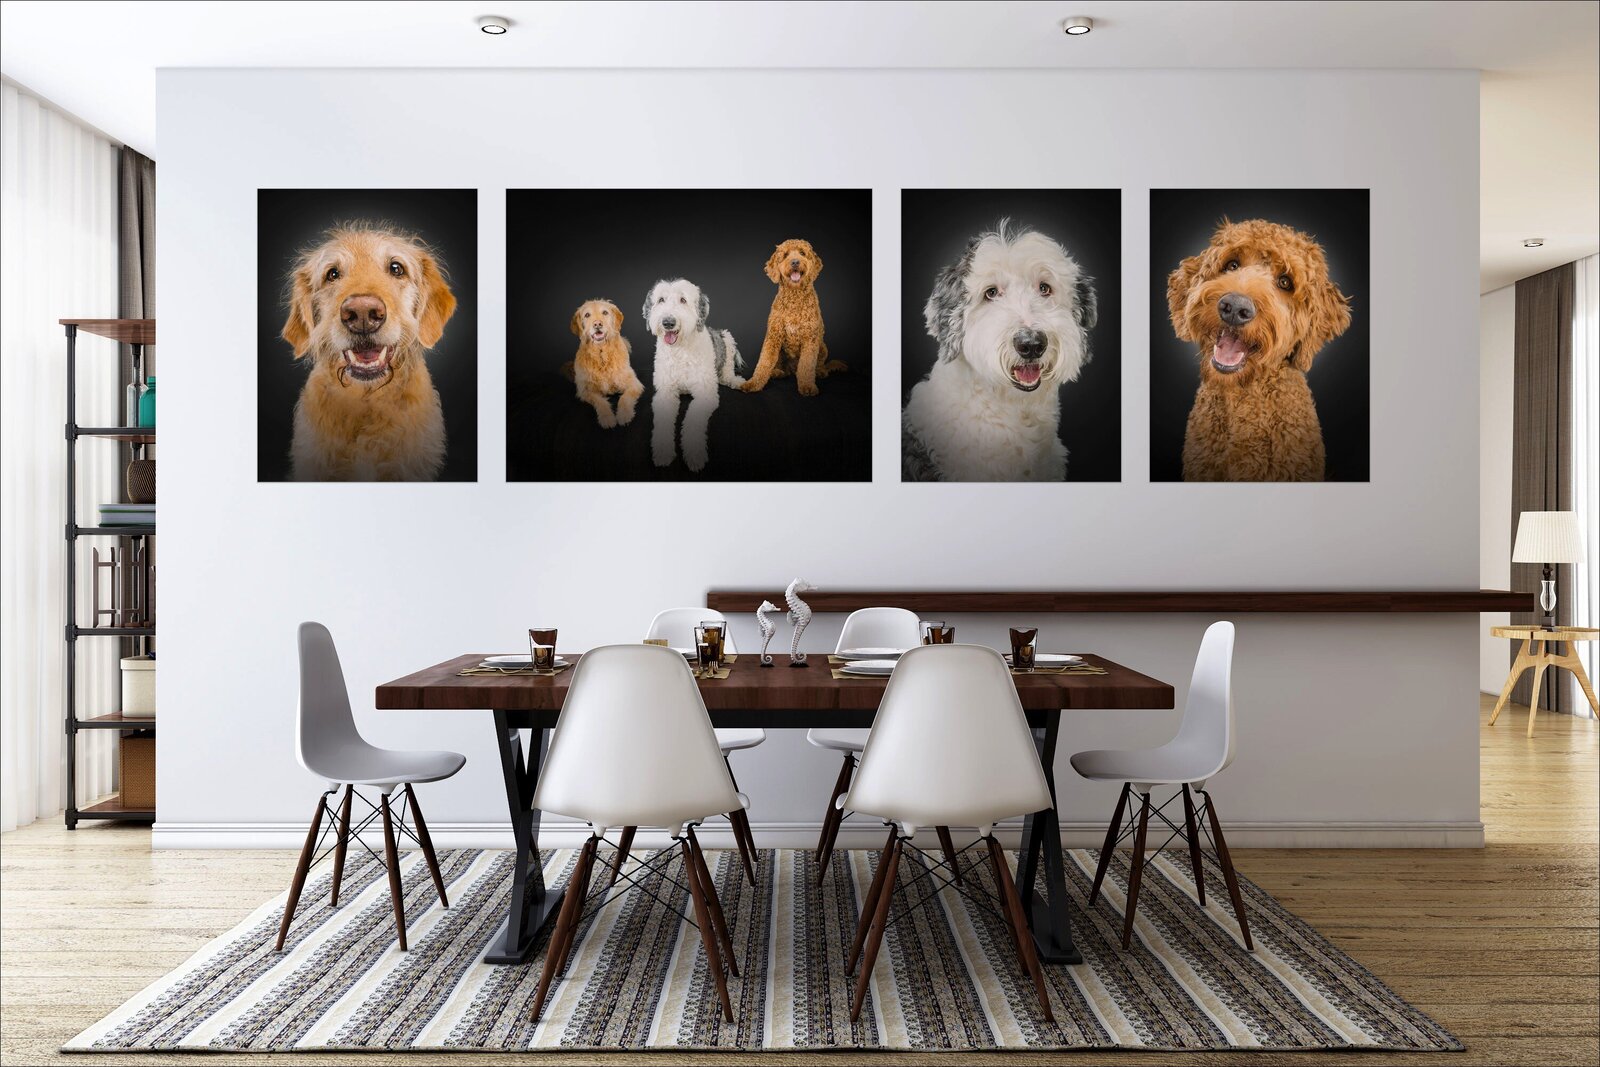 Gallery wall art of three golden doodle dogs hanging in moder decor dining room